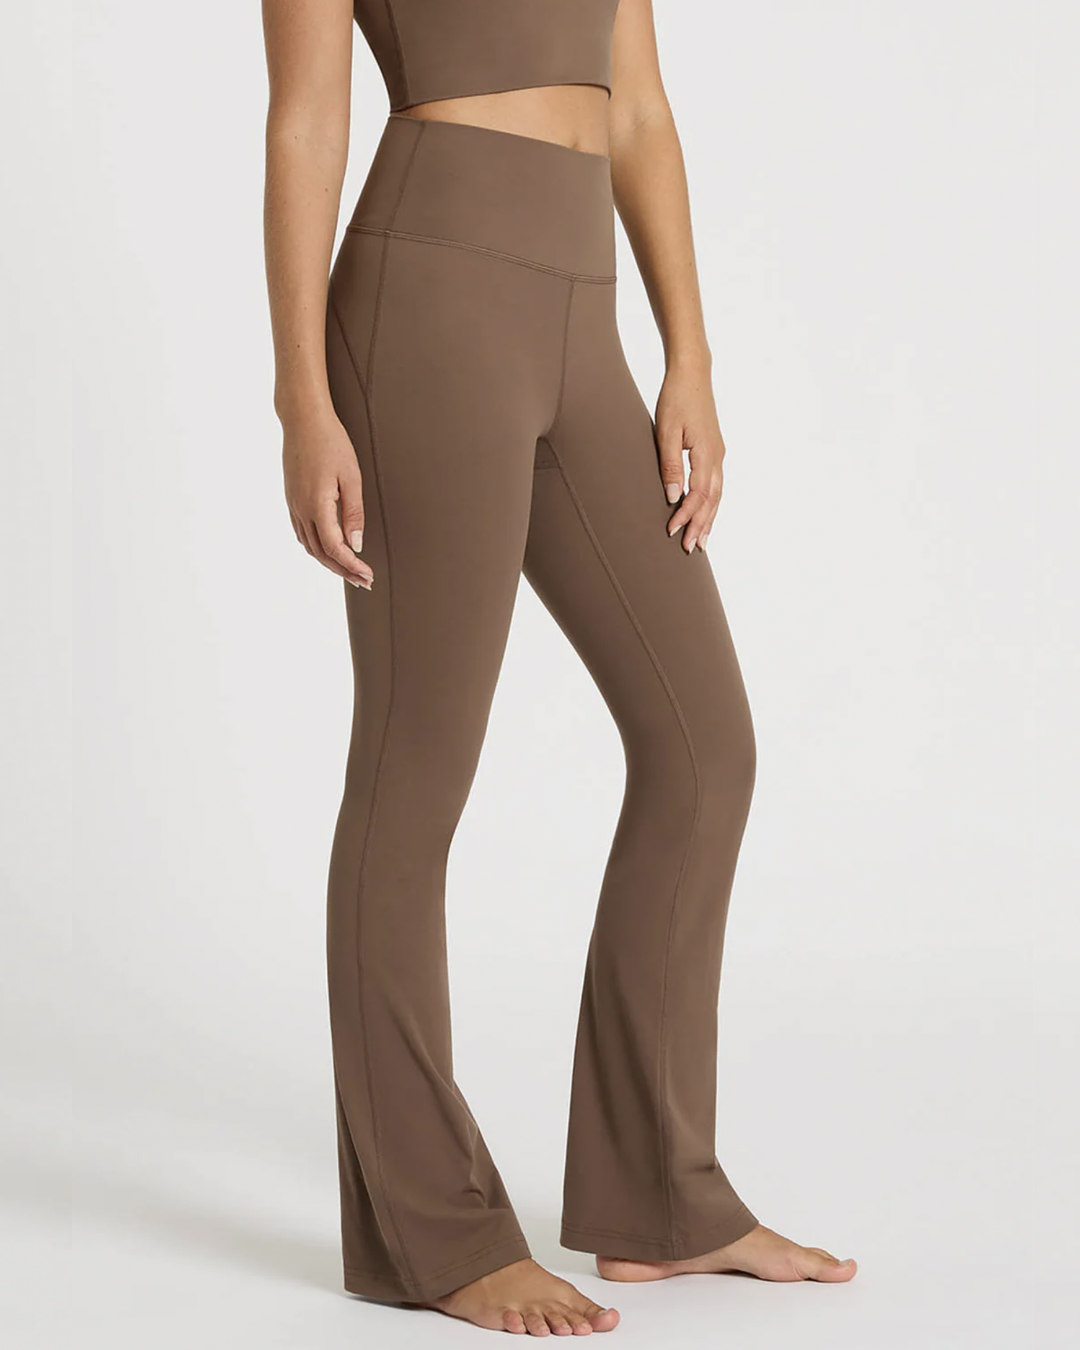 In Motion Flare Pant - Mocha Activewear by Nimble - Prae Wellness